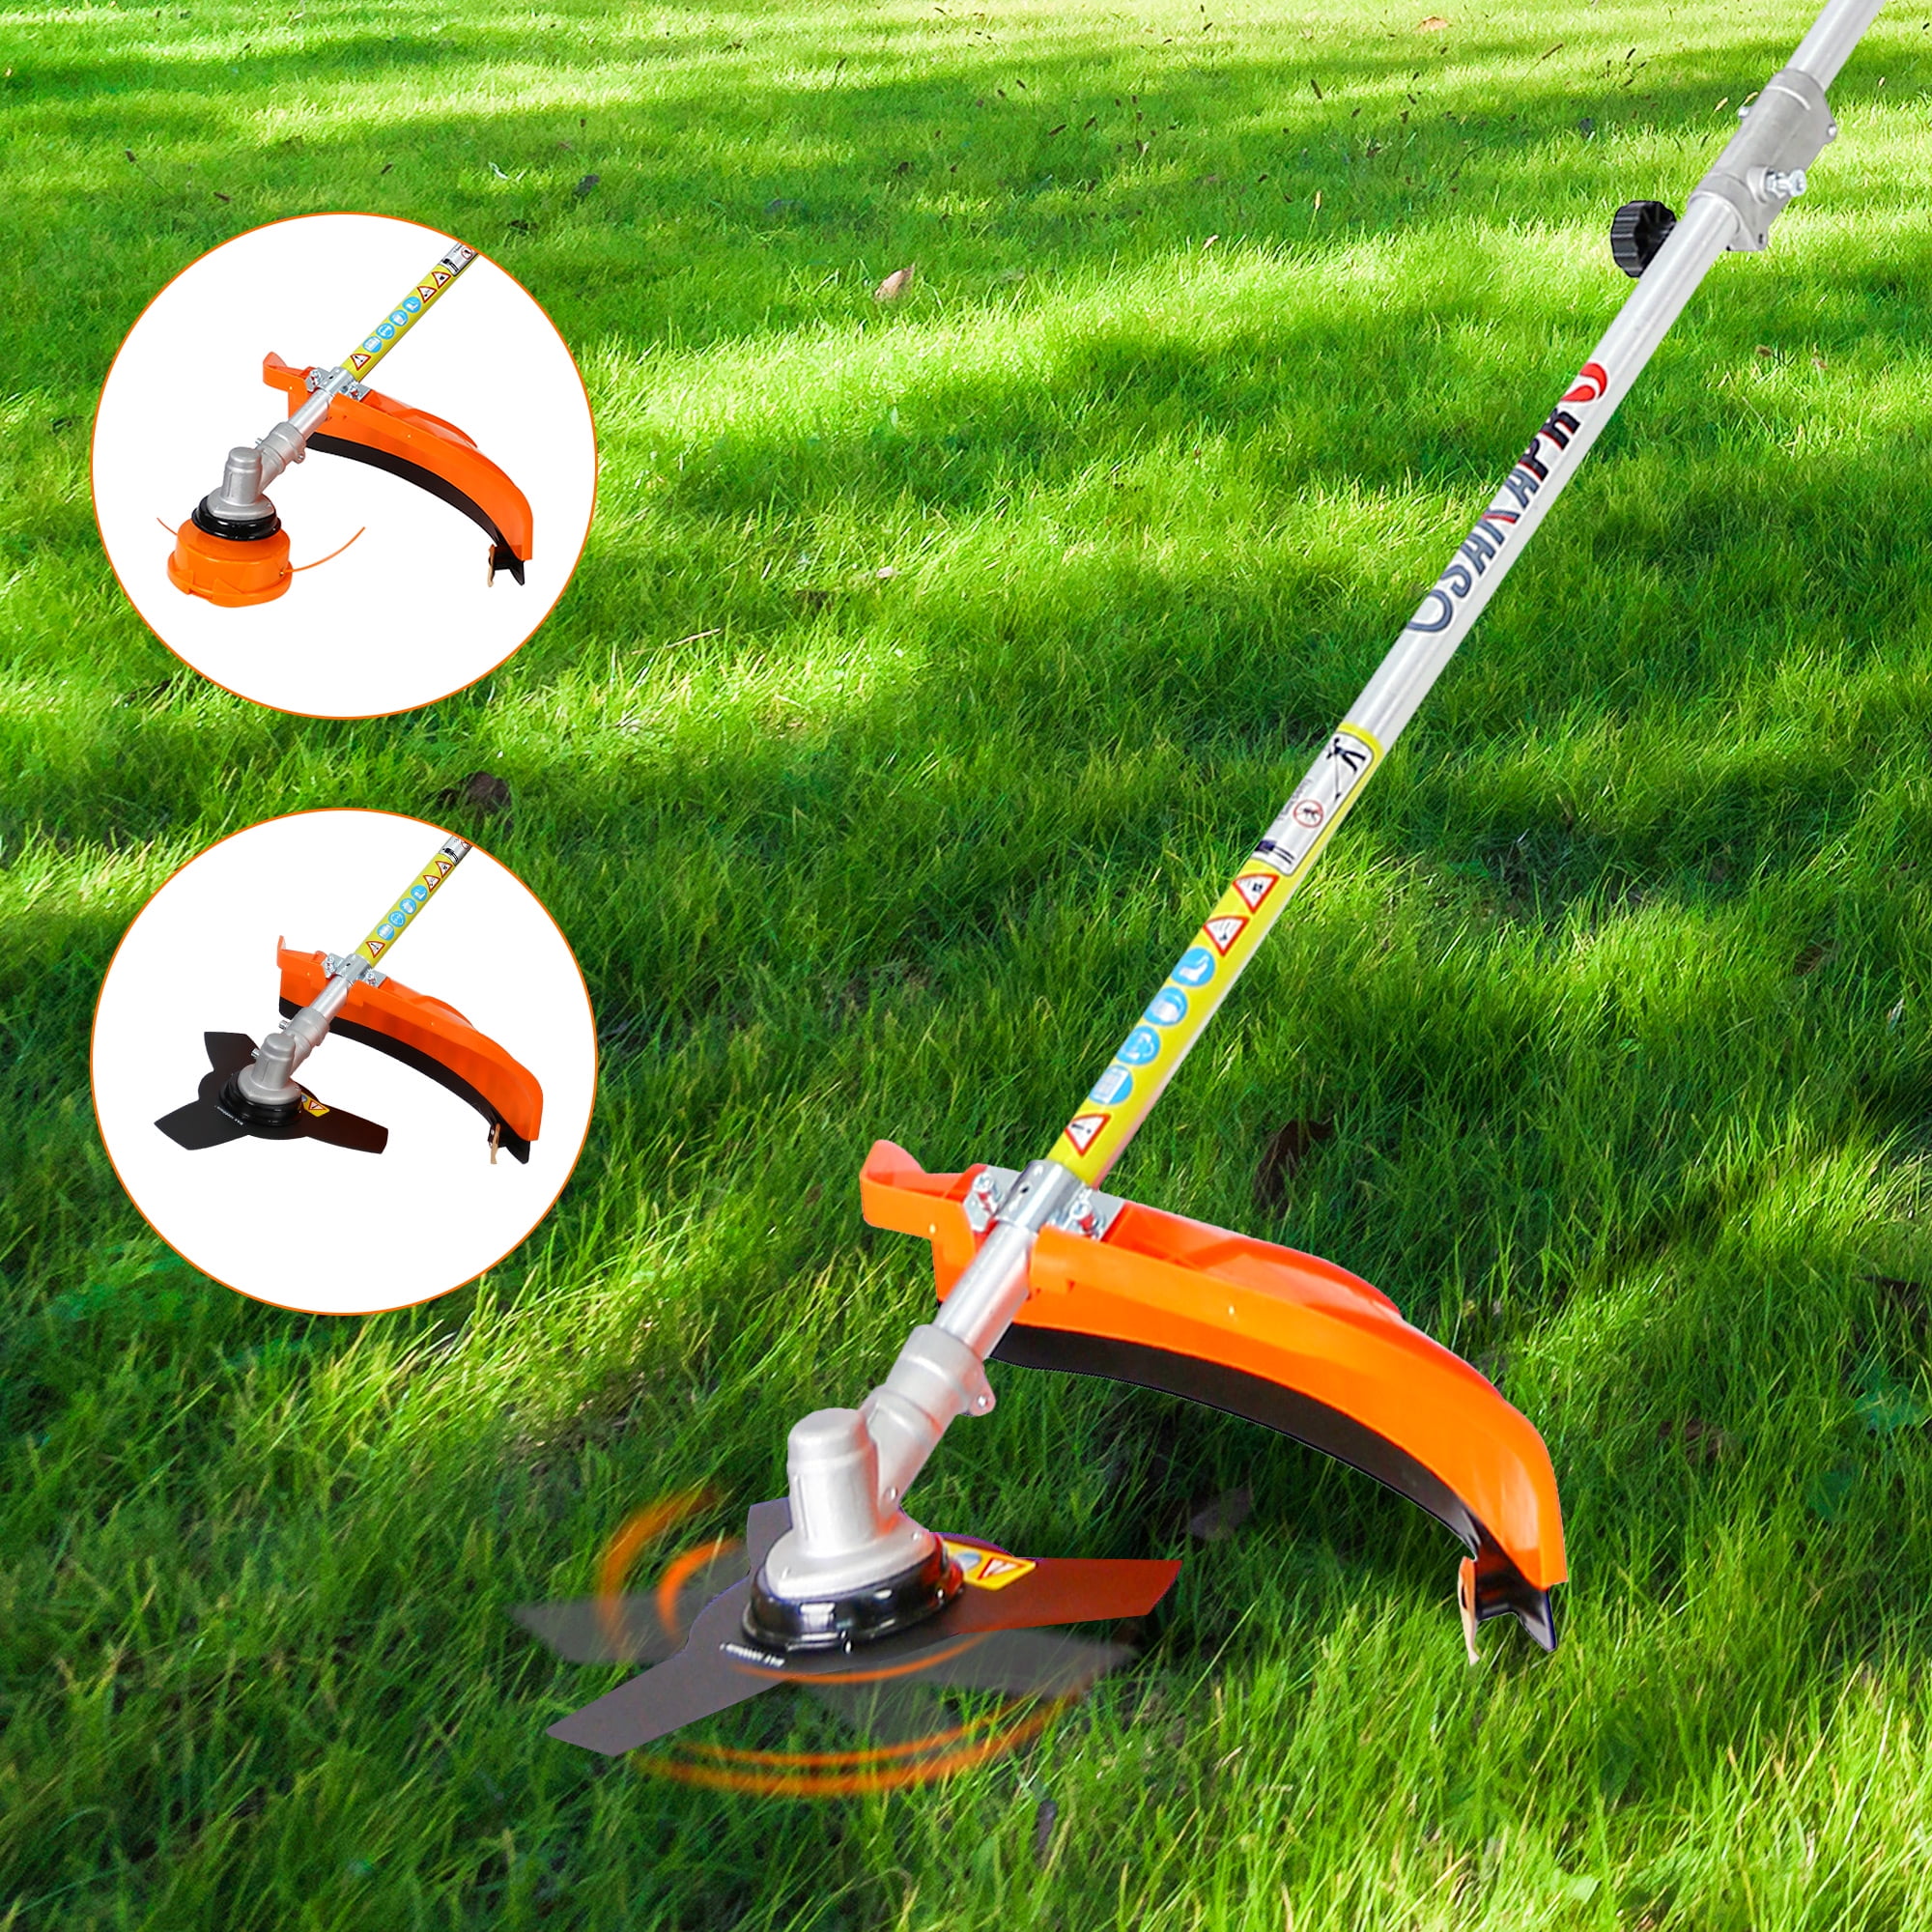 SYNGAR 4-in-1 Grass Trimmer Weed Eater Combos, 33CC 2-Cycle